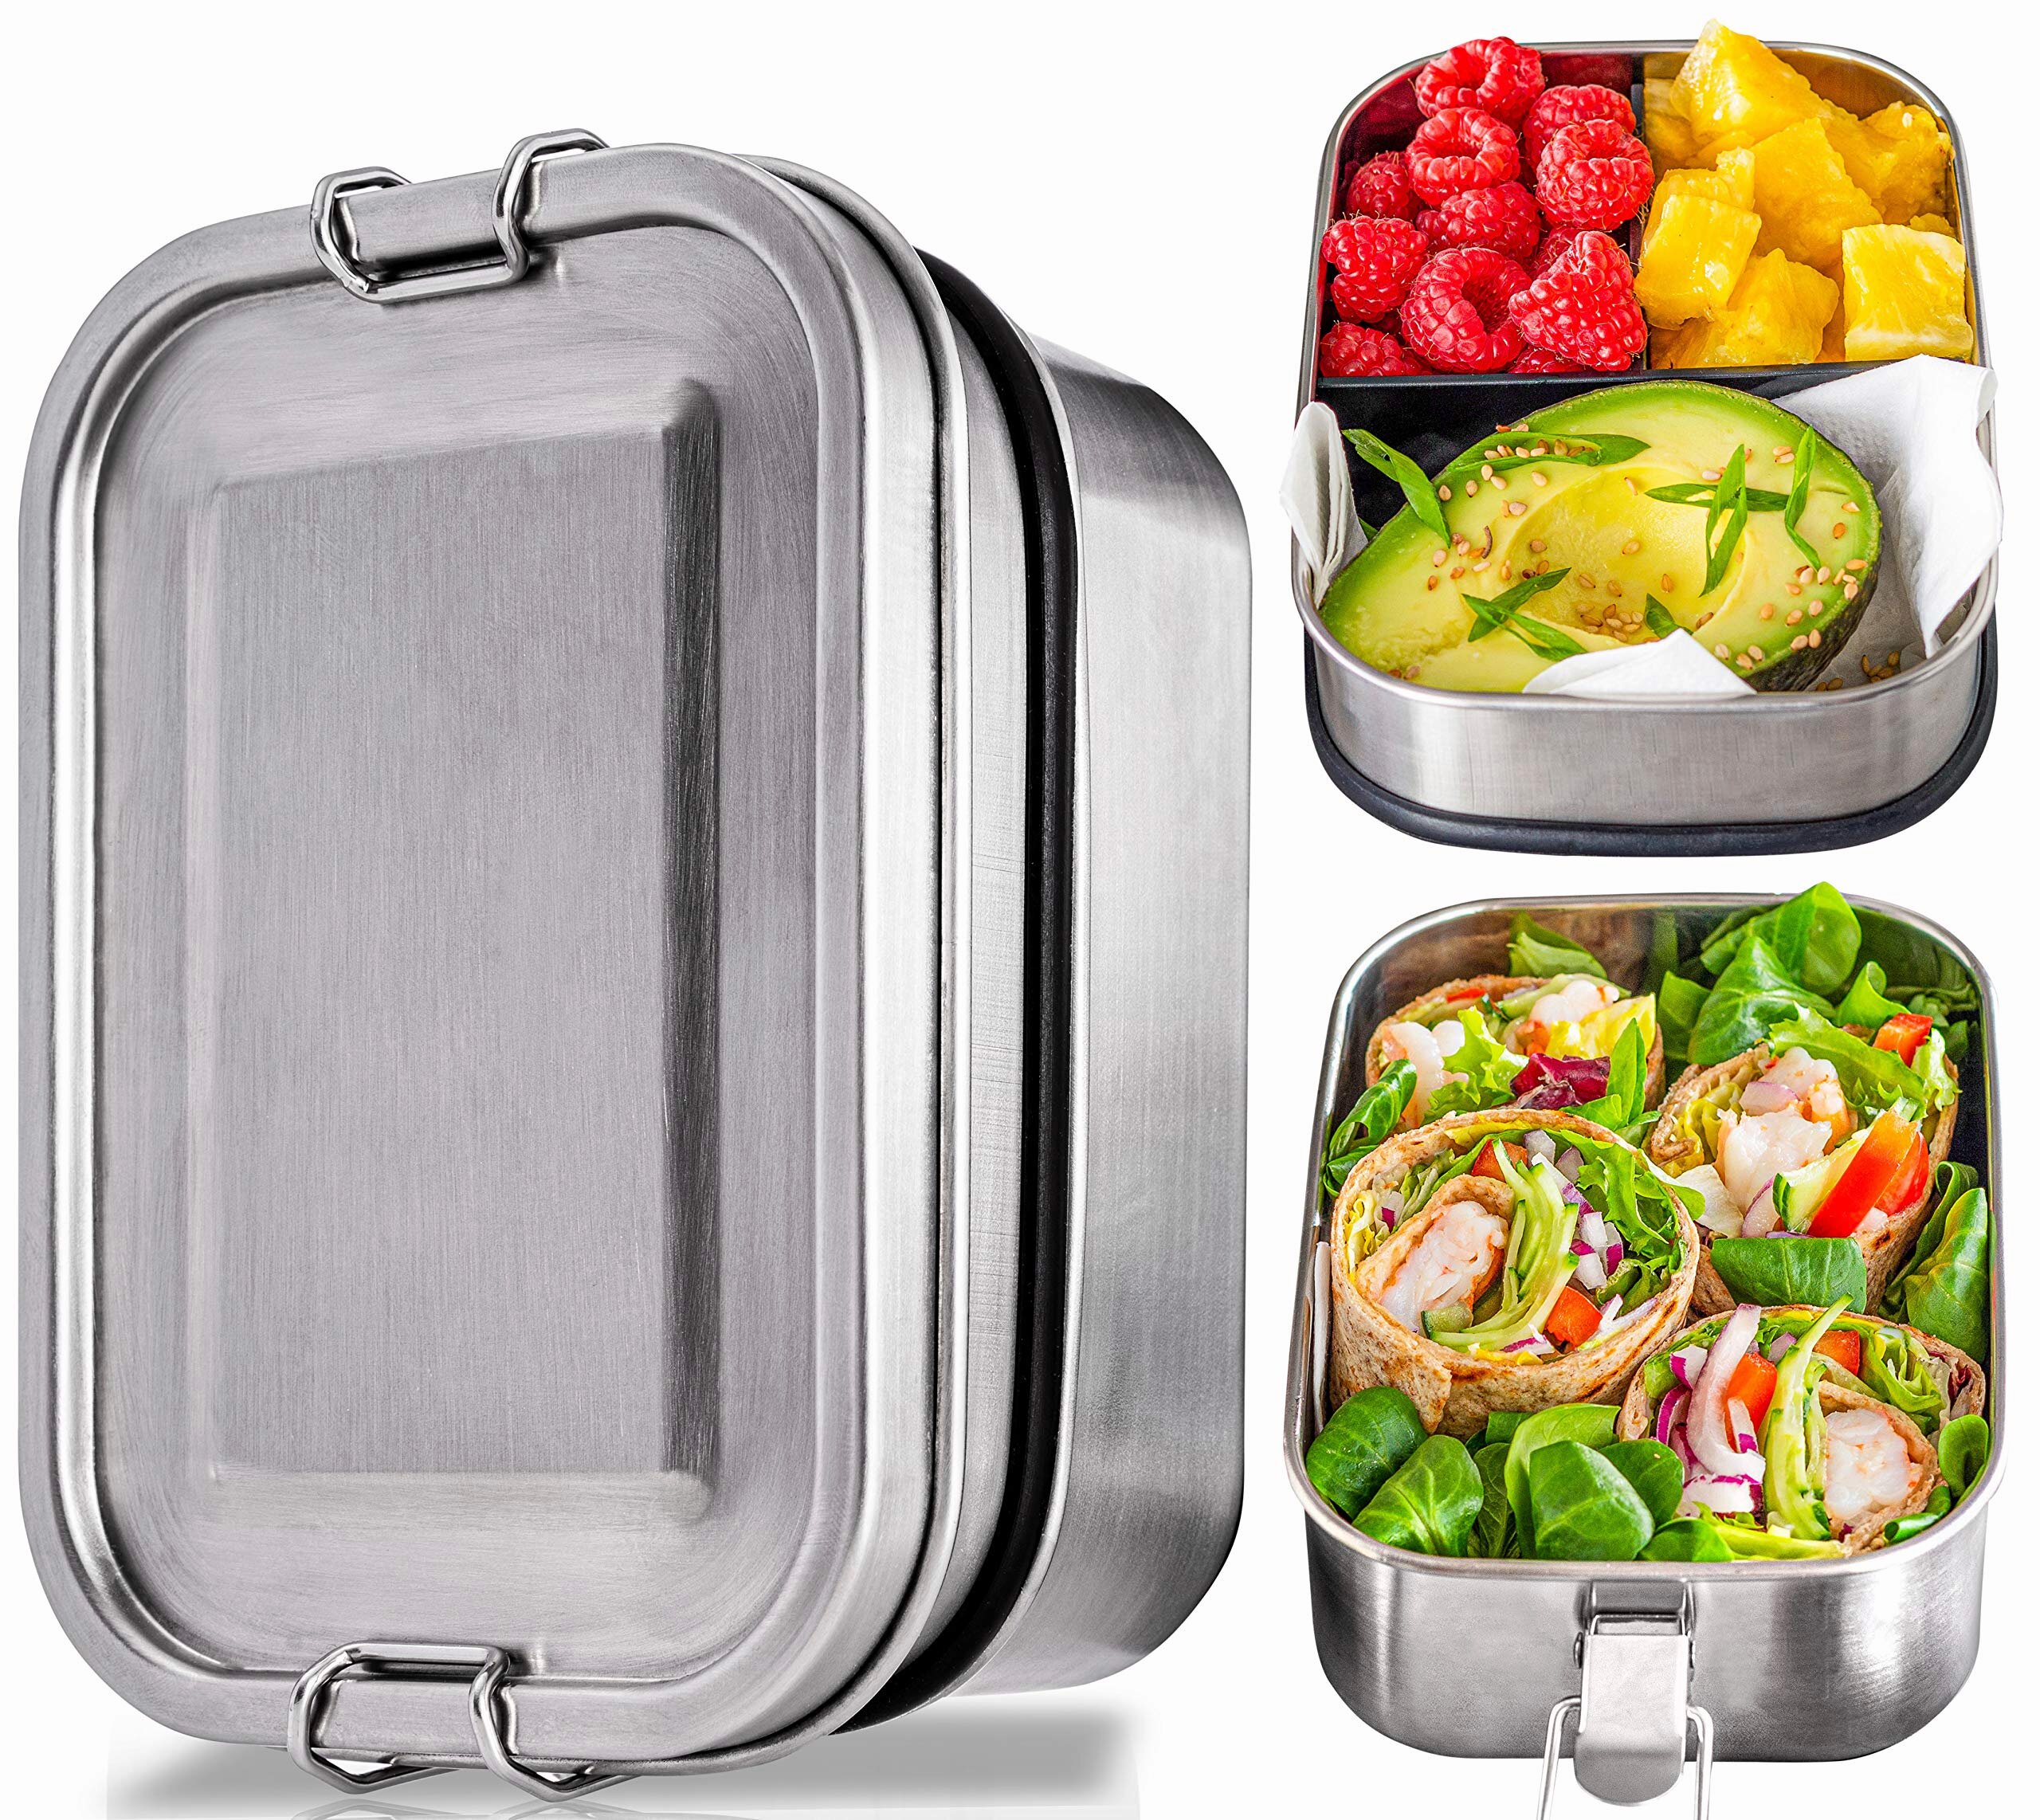 Reusable Box Food Storage Container Set Microwavable Lid Bento Home Lunchbox 